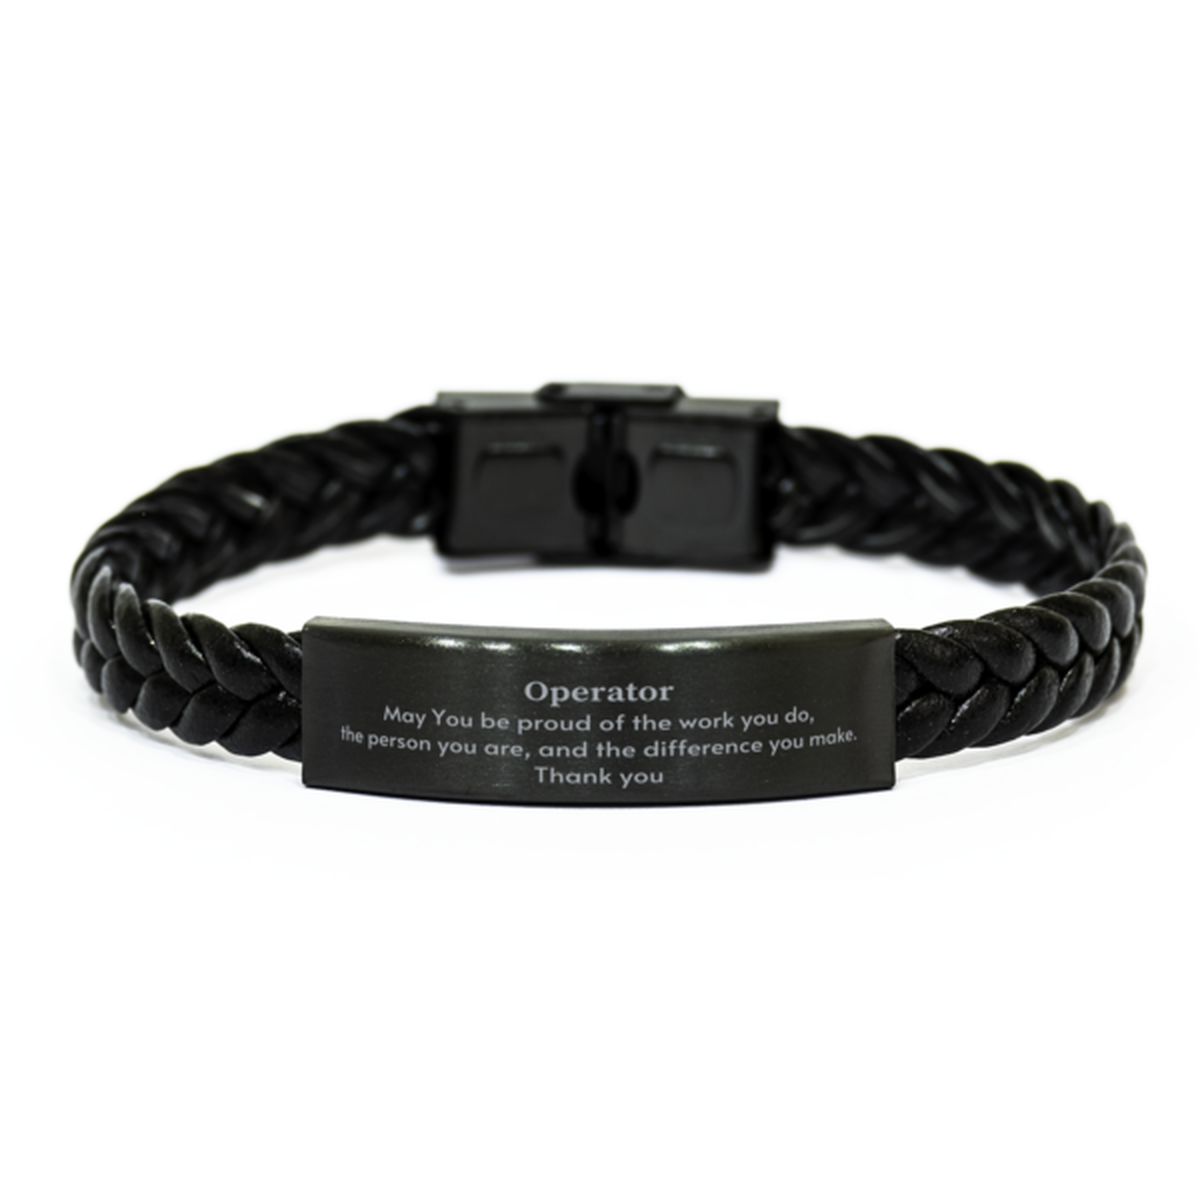 Heartwarming Braided Leather Bracelet Retirement Coworkers Gifts for Operator, Operator May You be proud of the work you do, the person you are Gifts for Boss Men Women Friends